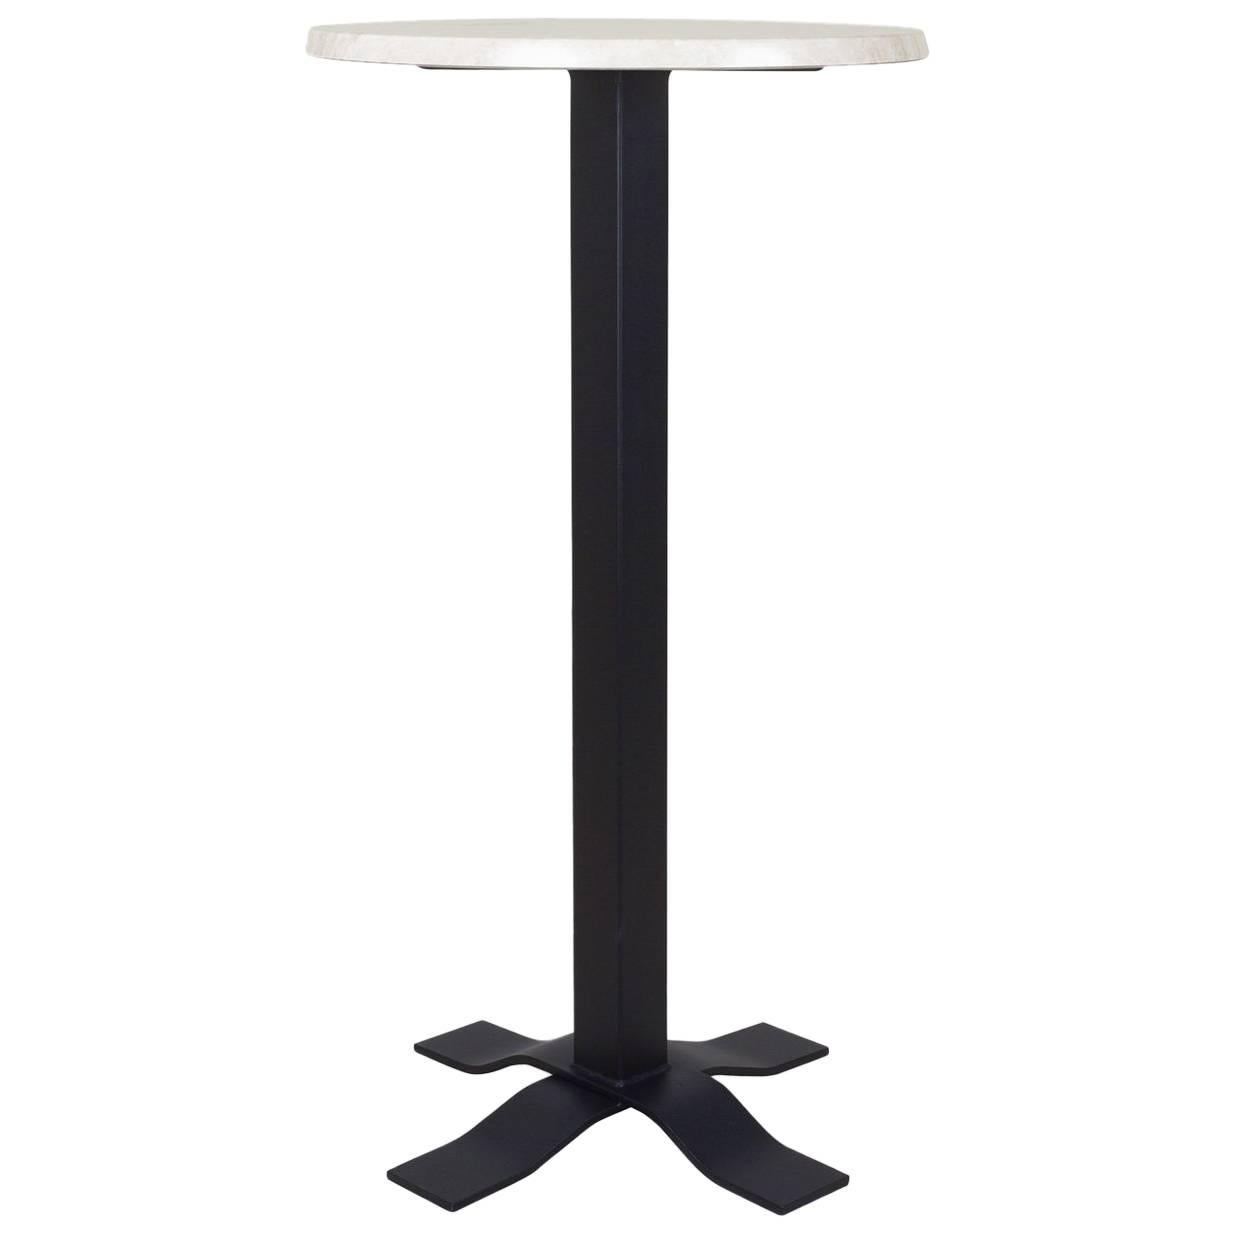 Bistro High Table in Wrought Iron with Marble Top. Indoor & Outdoor For Sale